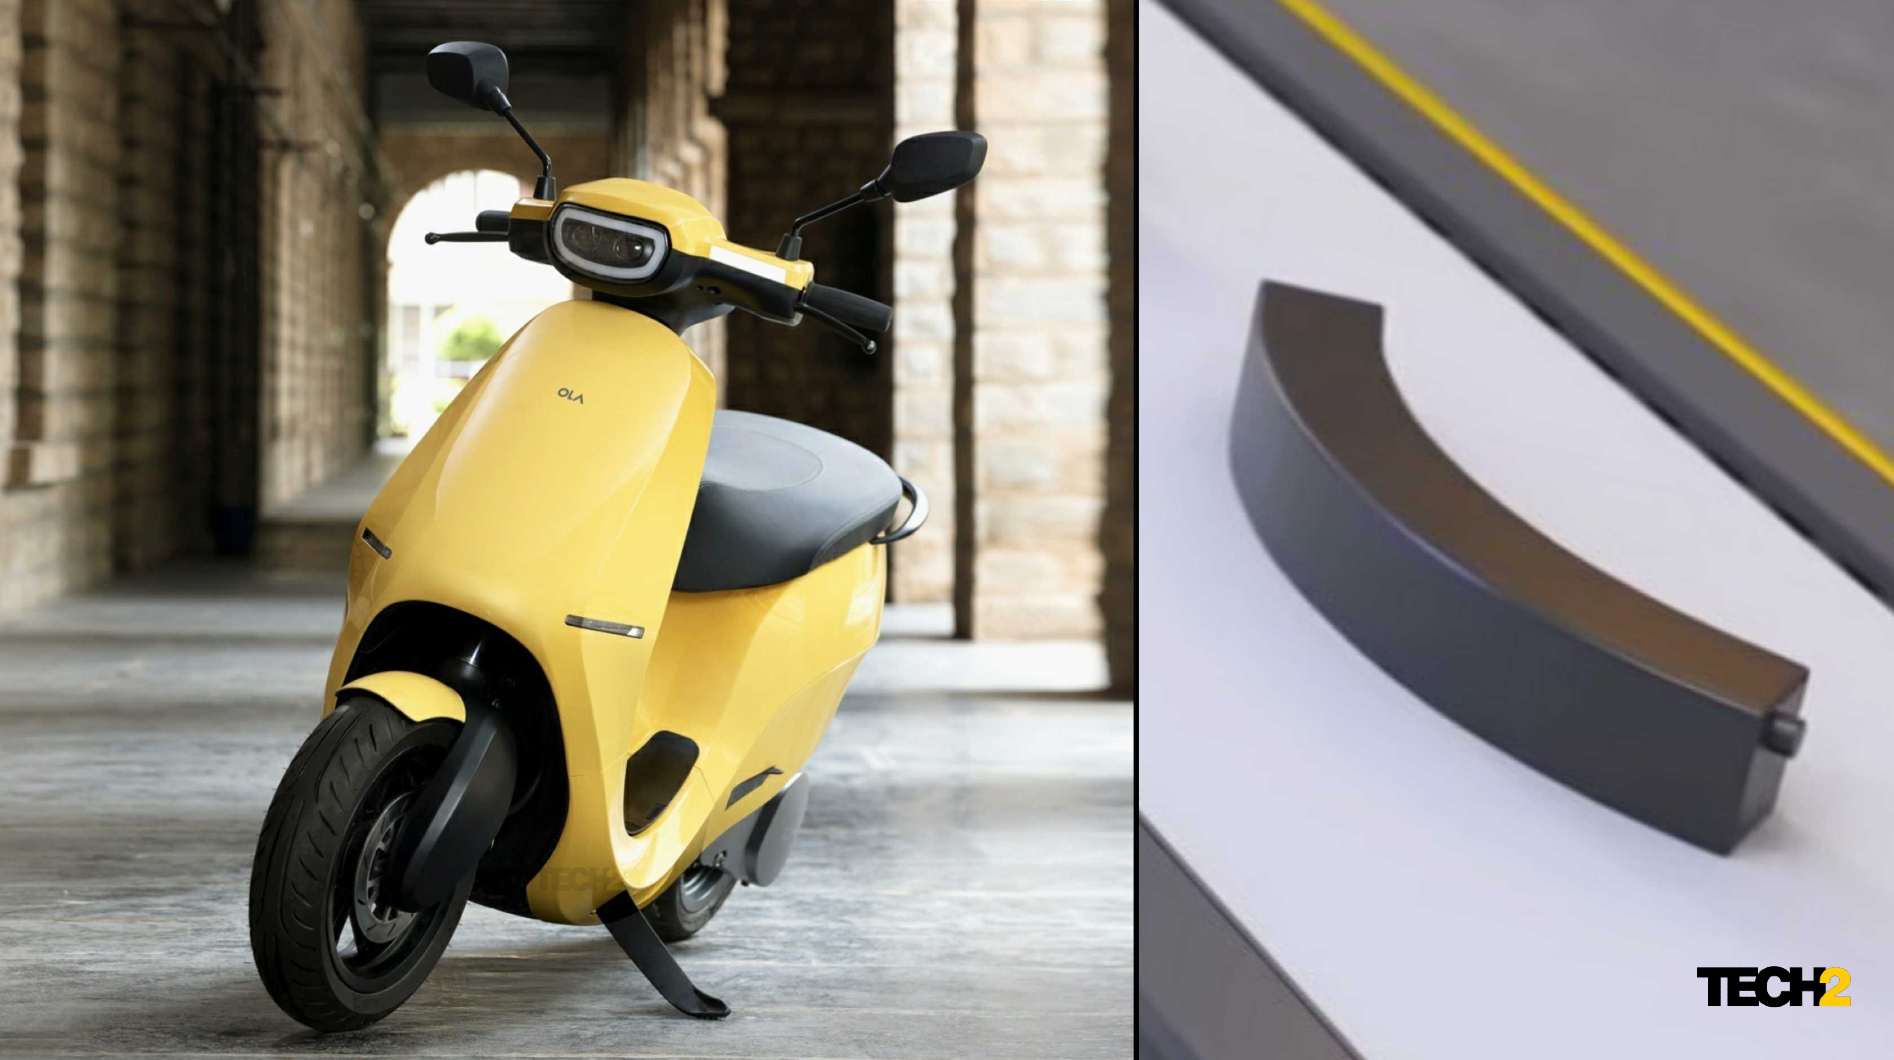 Tech2 has learned the Ola Electric scooter will have a battery capacity of close to 3.6 kWh. Image: Ola Electric/Tech2